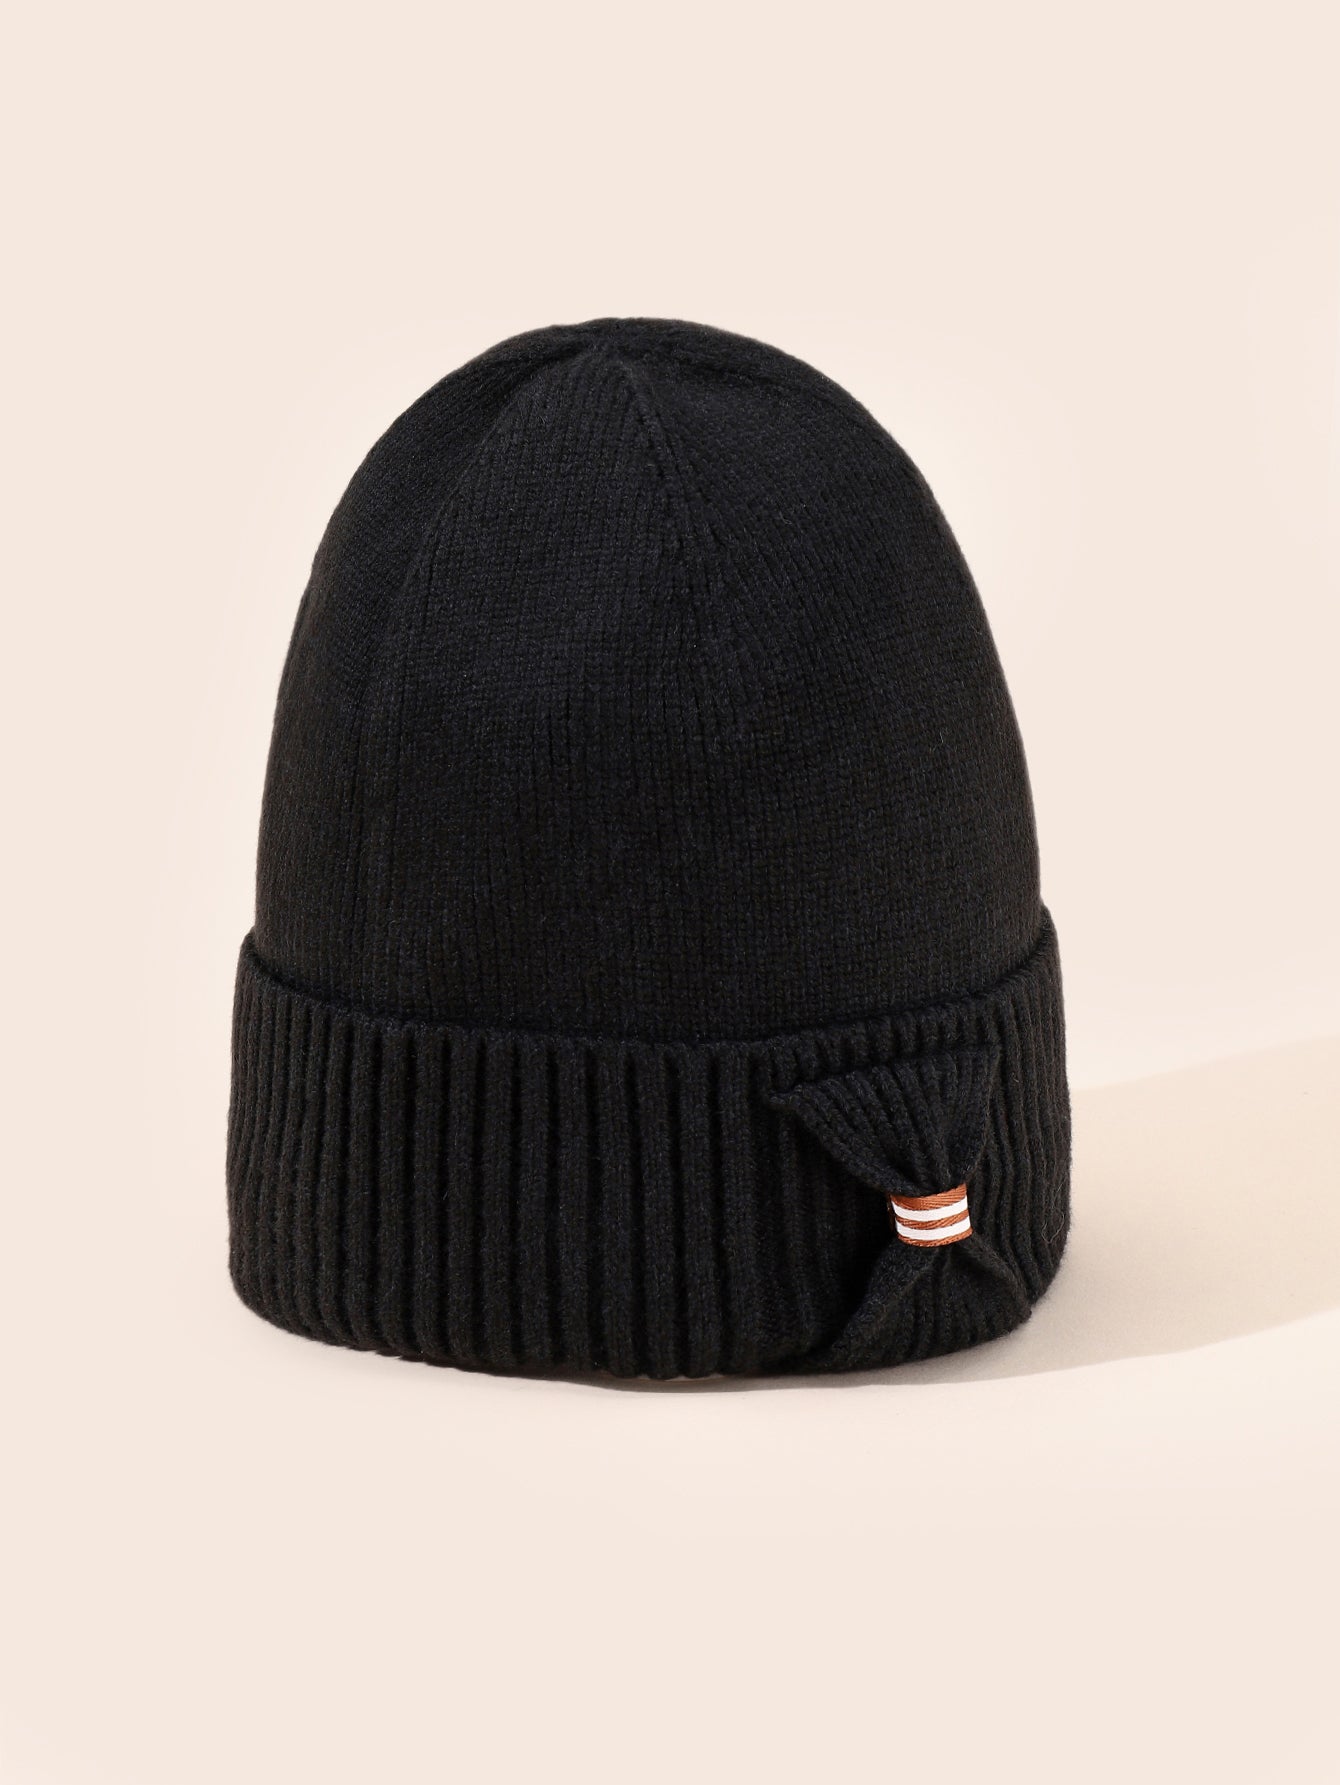 Solid Color Winter Warm Knitted Cap Sai Feel